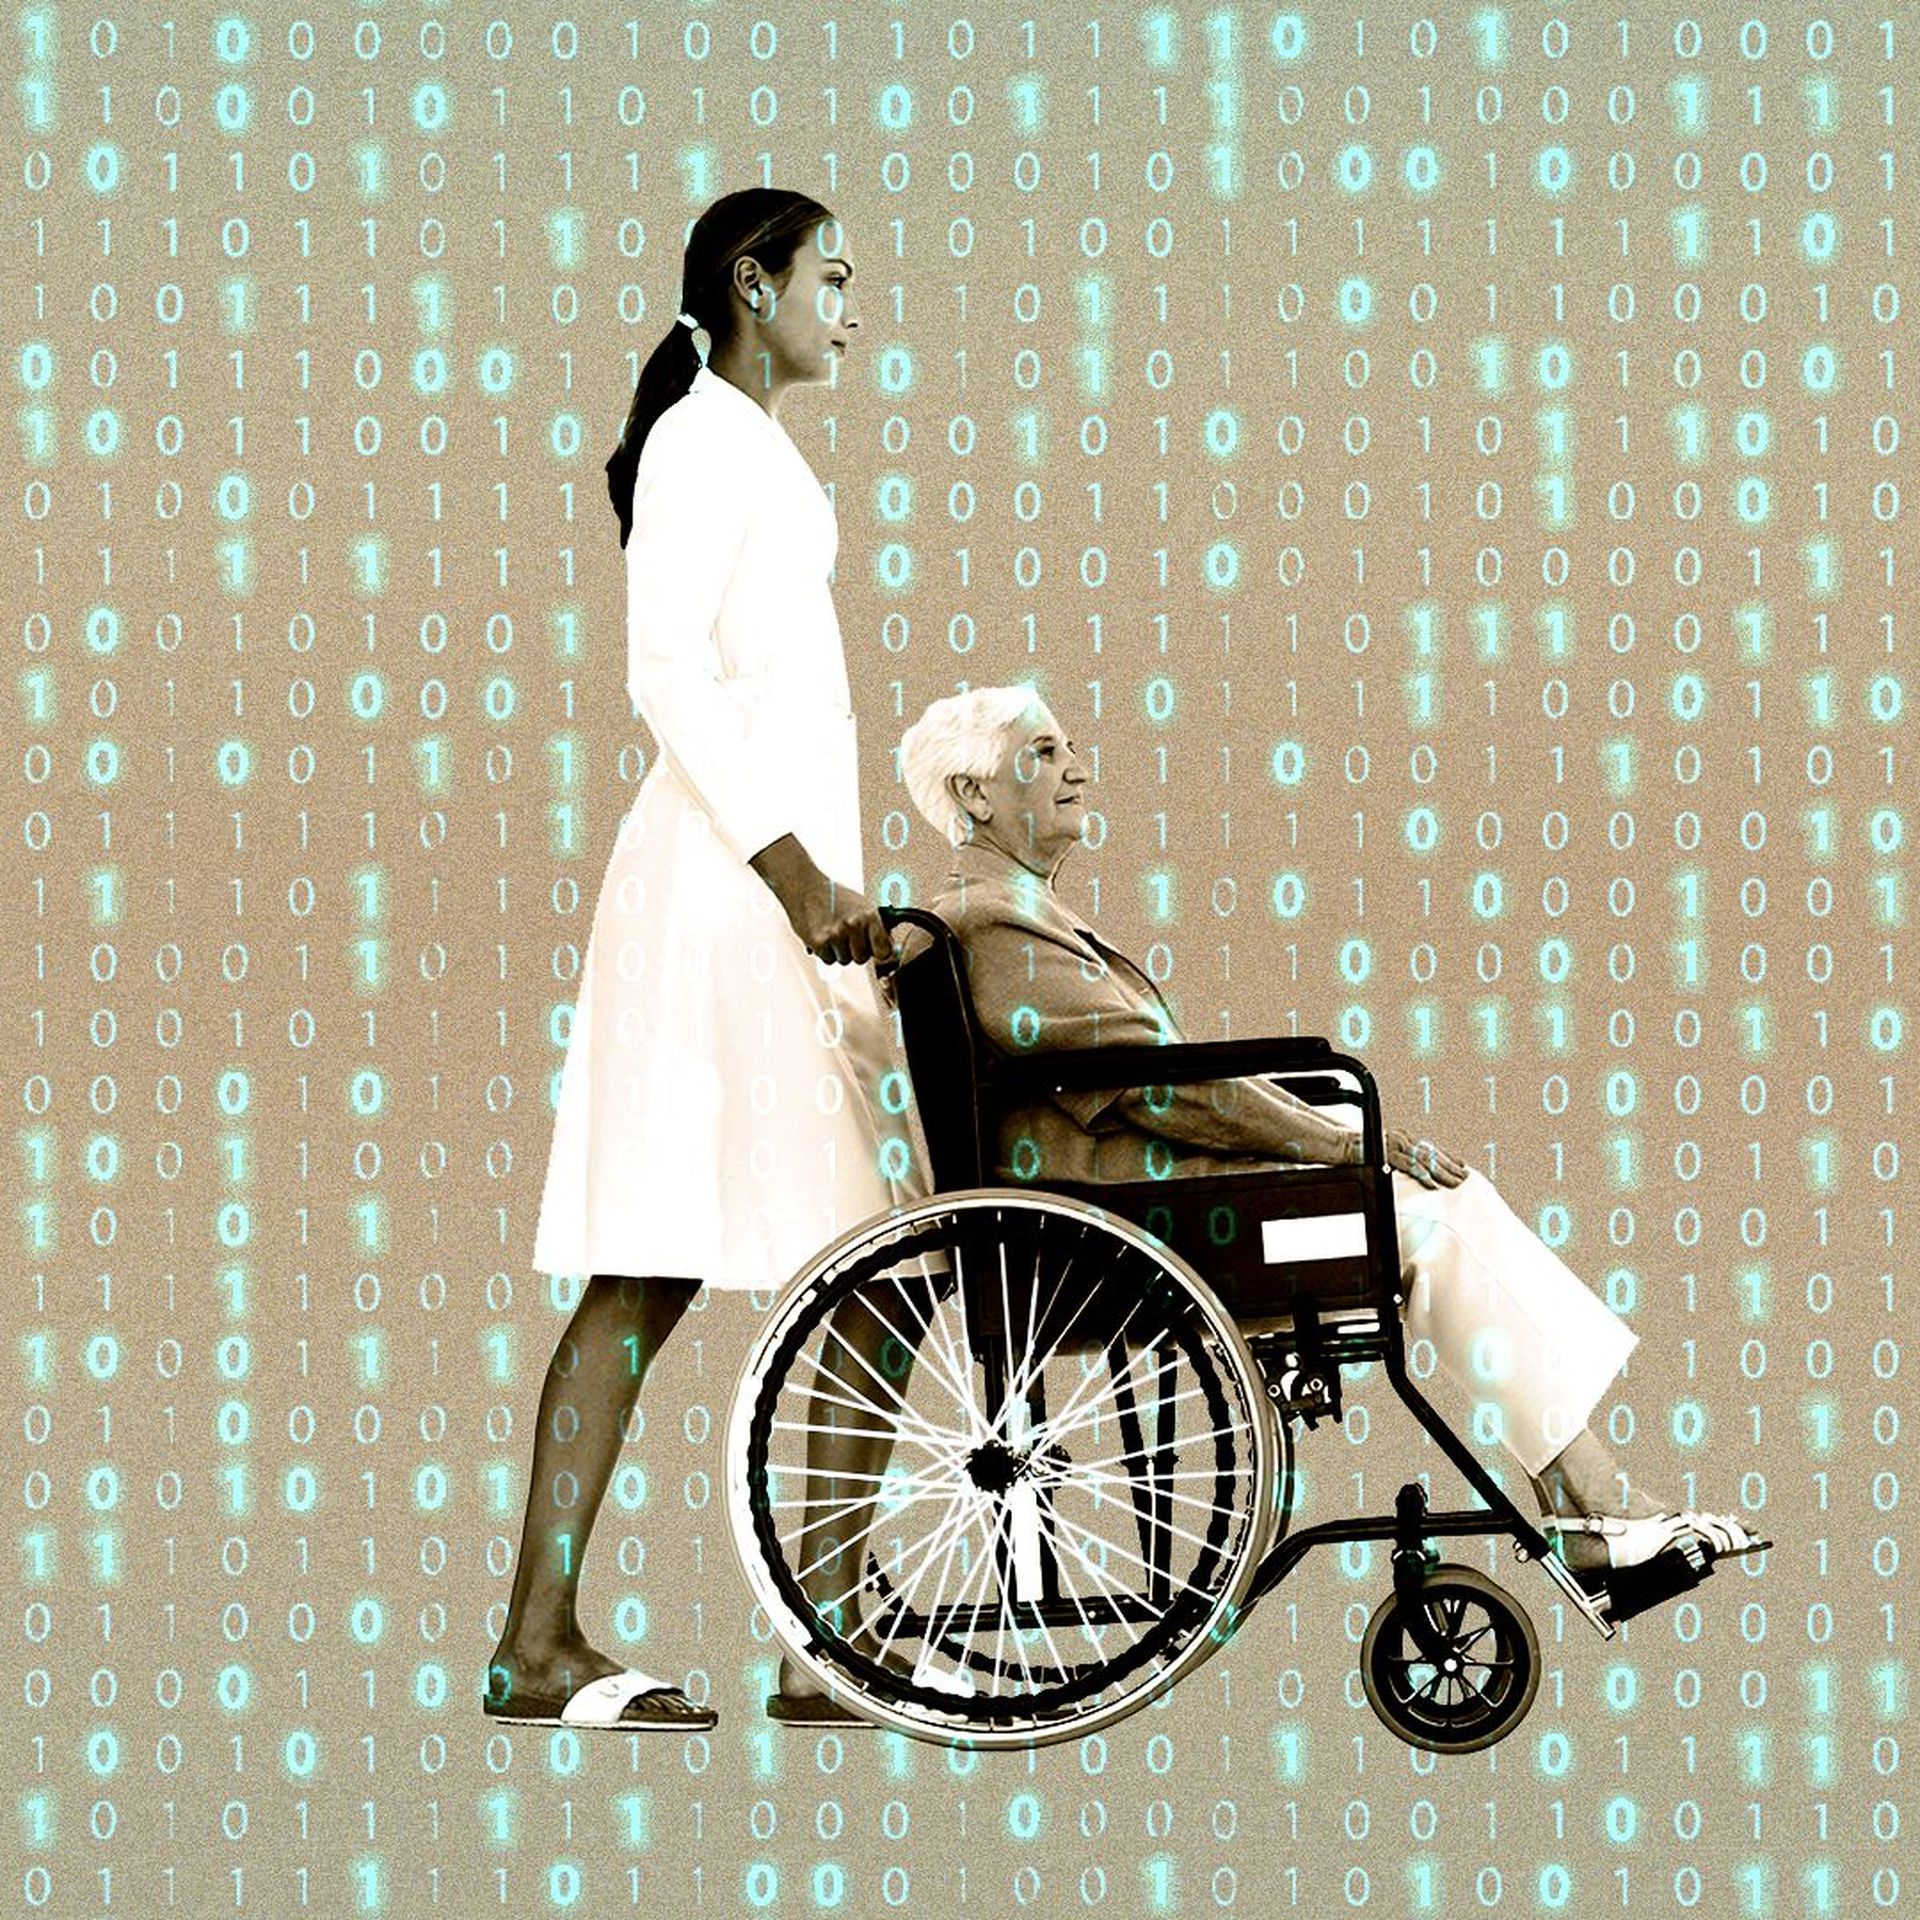 Illustration of a nurse pushing a senior citizen in a wheelchair with binary code lighting up in the background